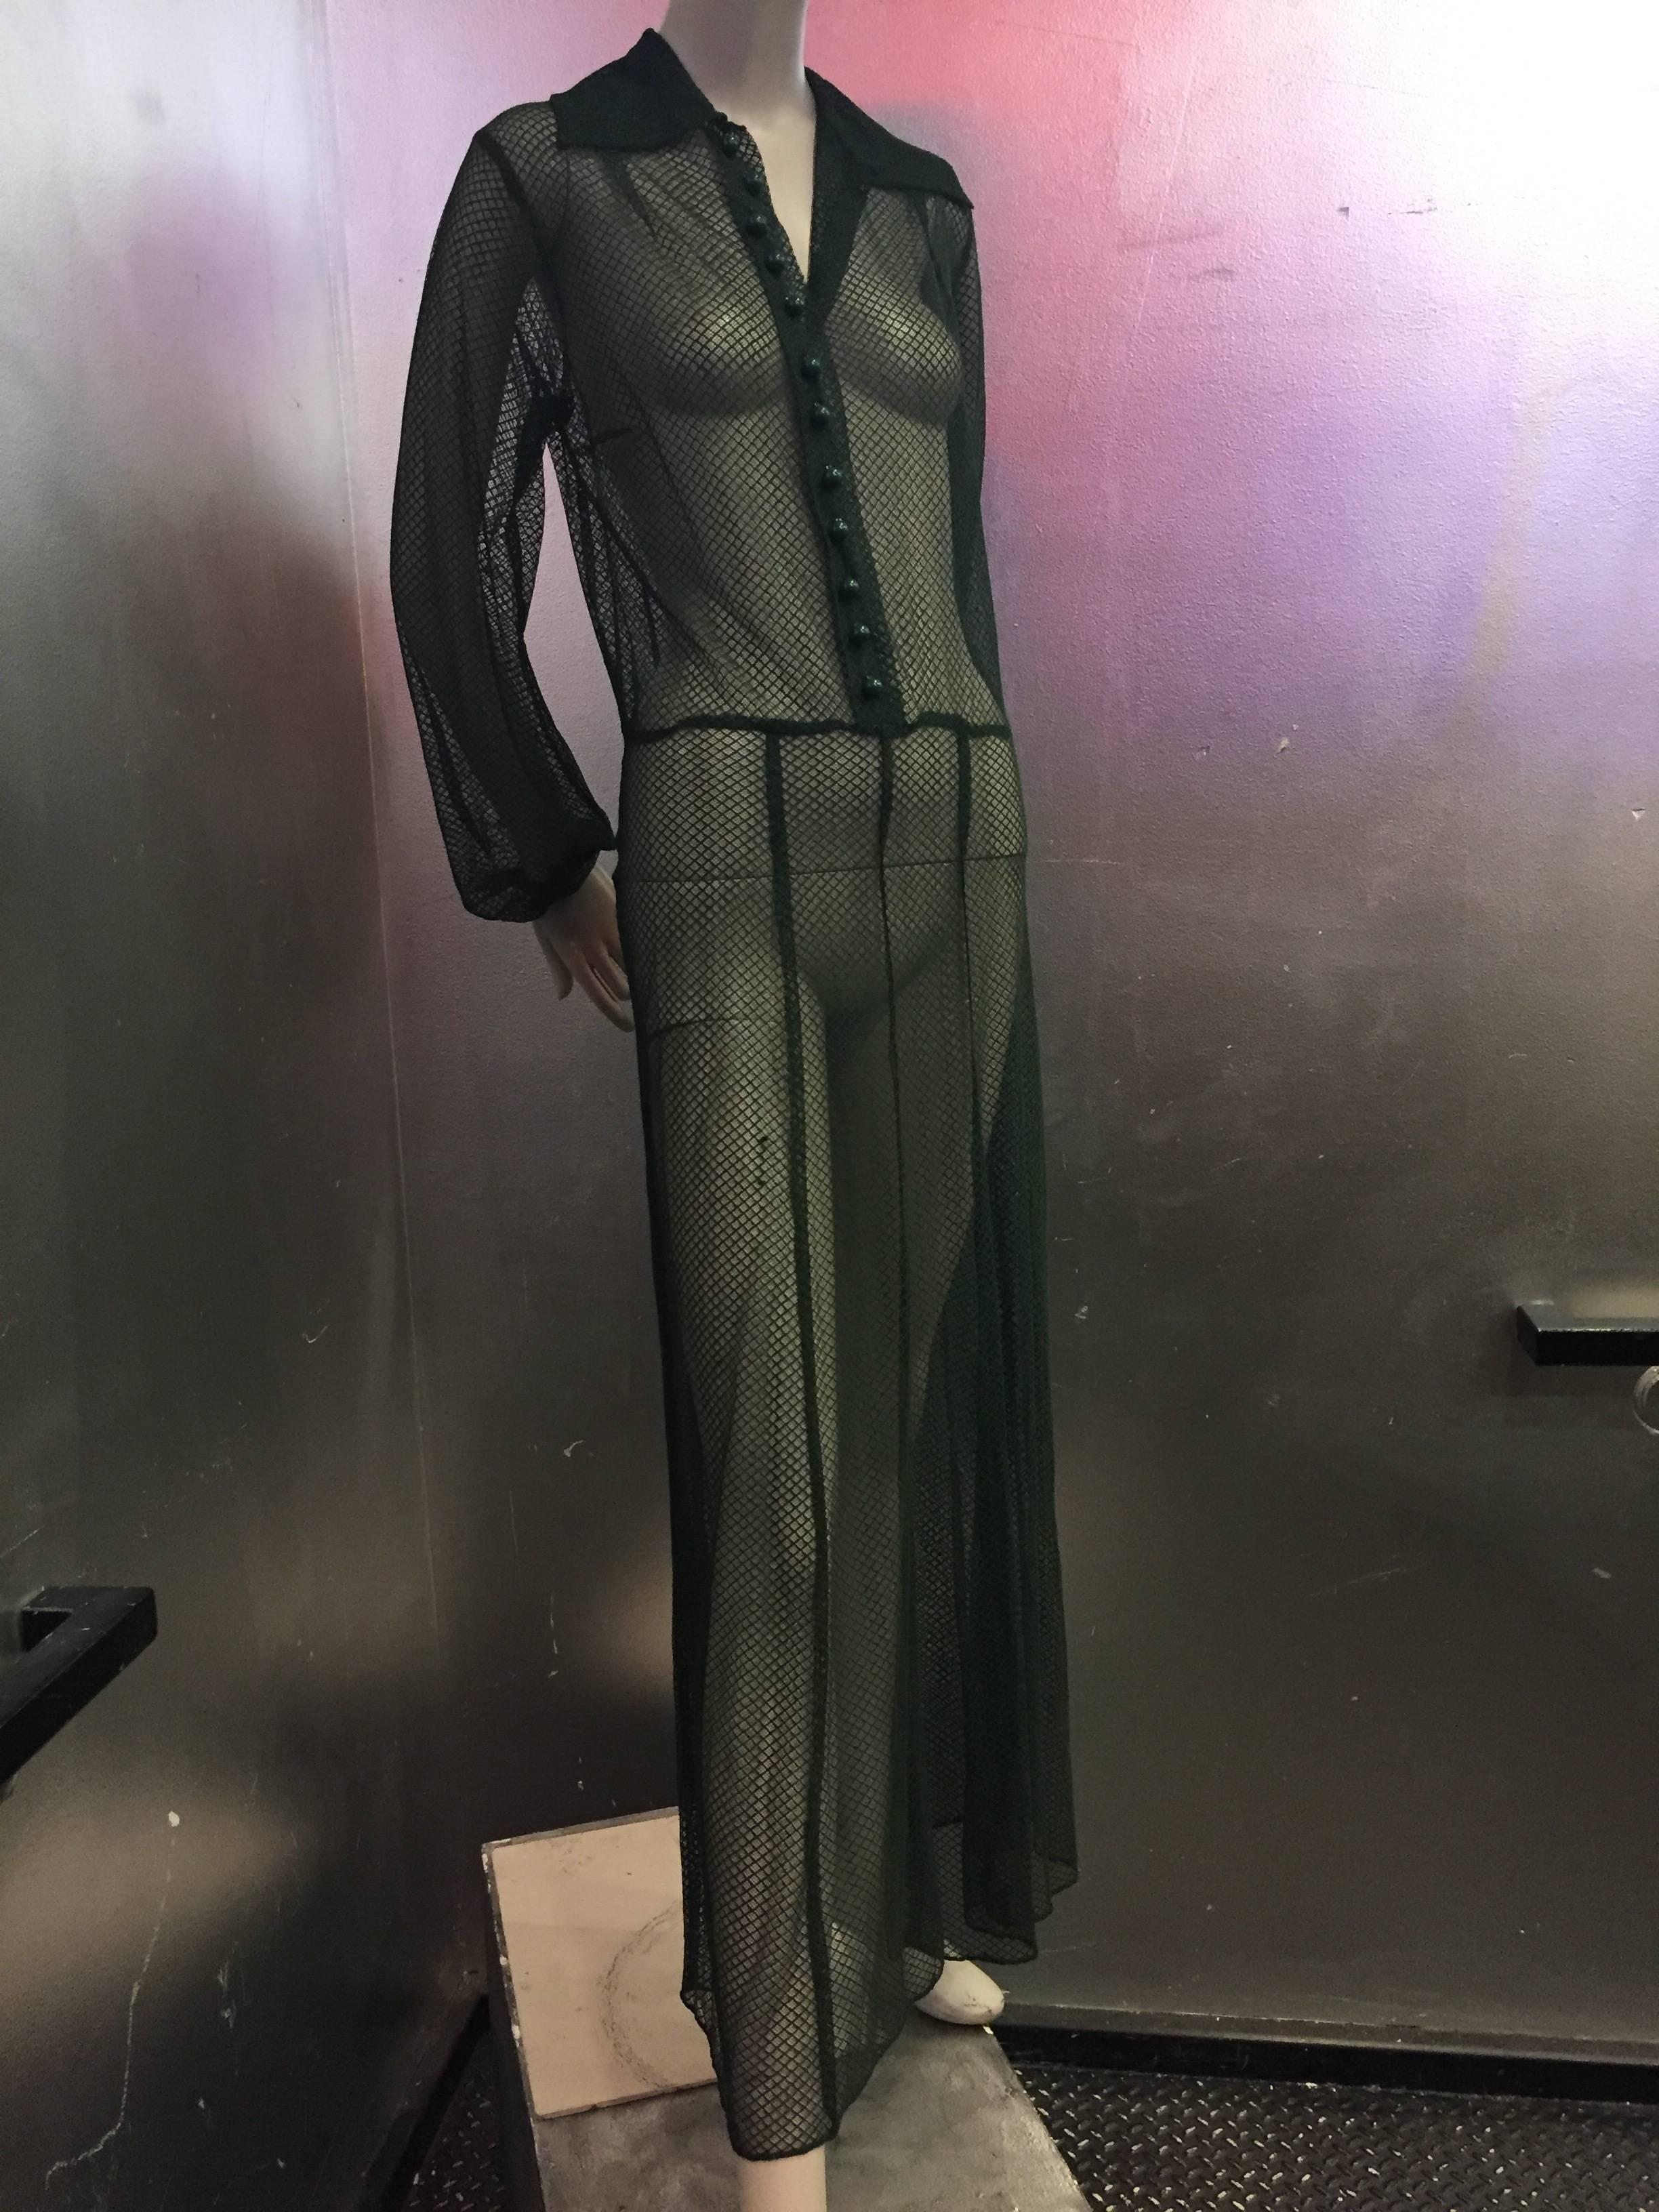 An outstanding and modern net gown from the 30's. Featuring a wide collar, round bakelite buttons in a slightly lighter shade of green accentuate the bodice. Sleek design that can be worn with any underpinning. 

US Size 6. 